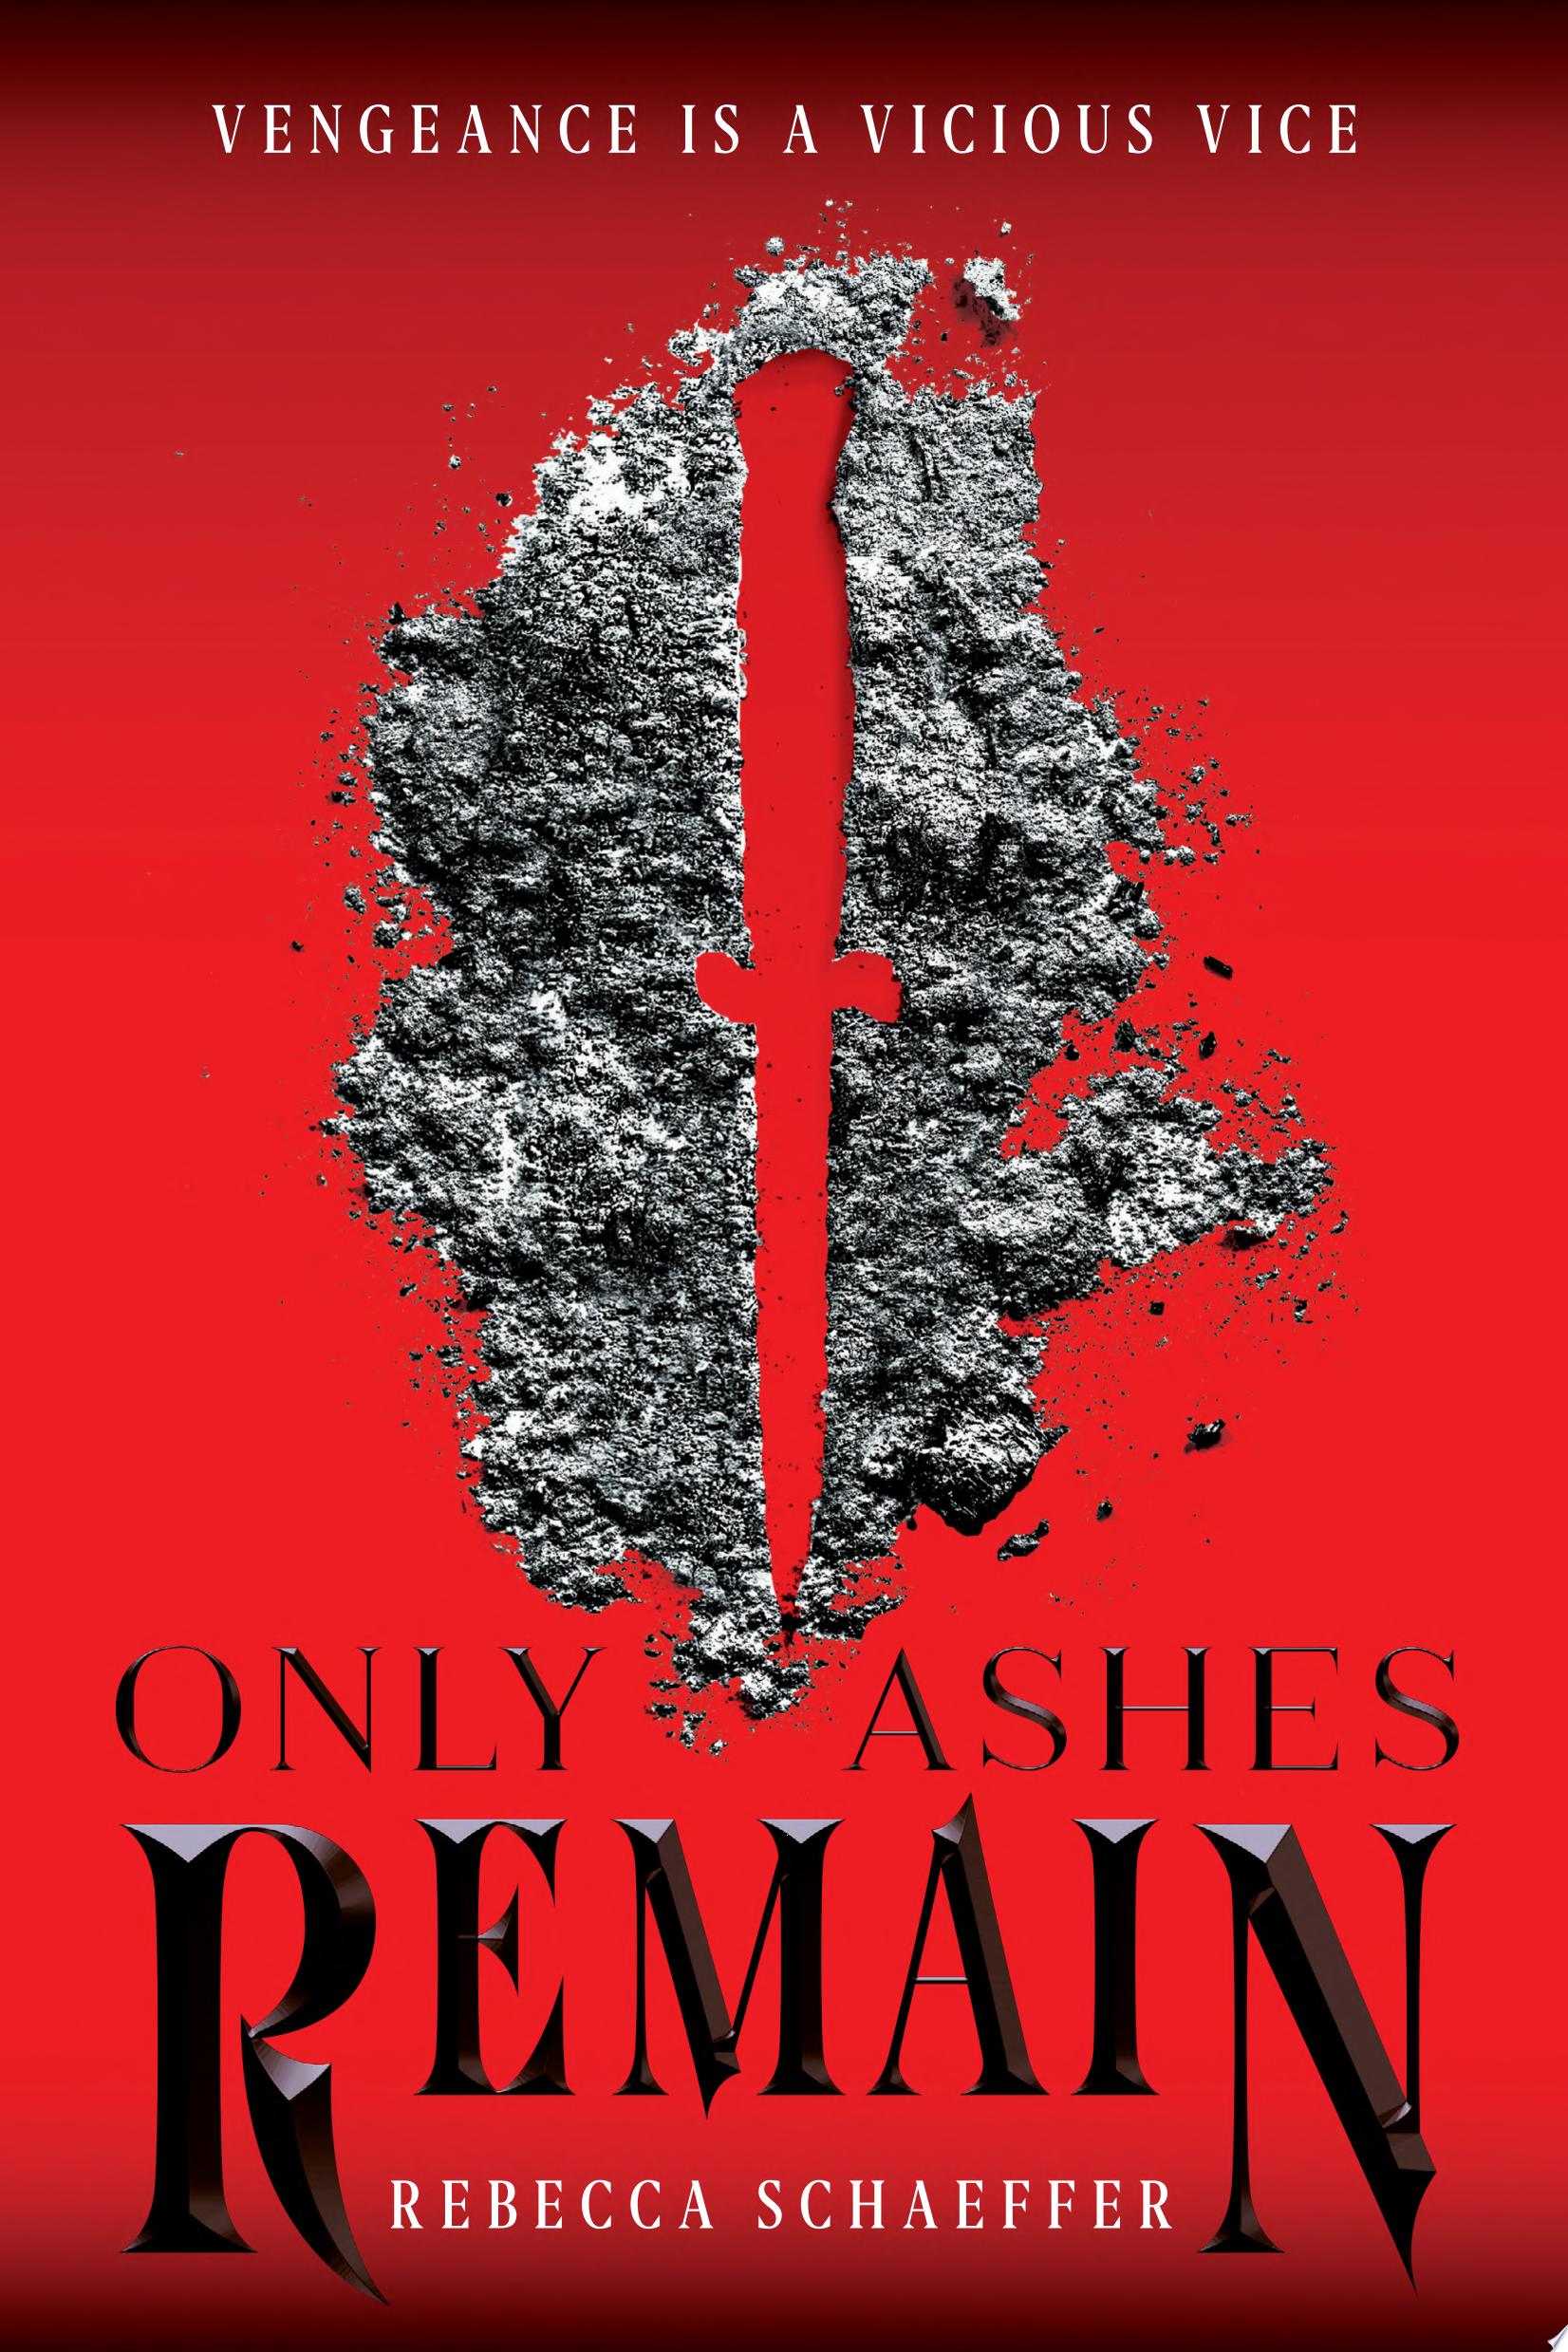 Image for "Only Ashes Remain"